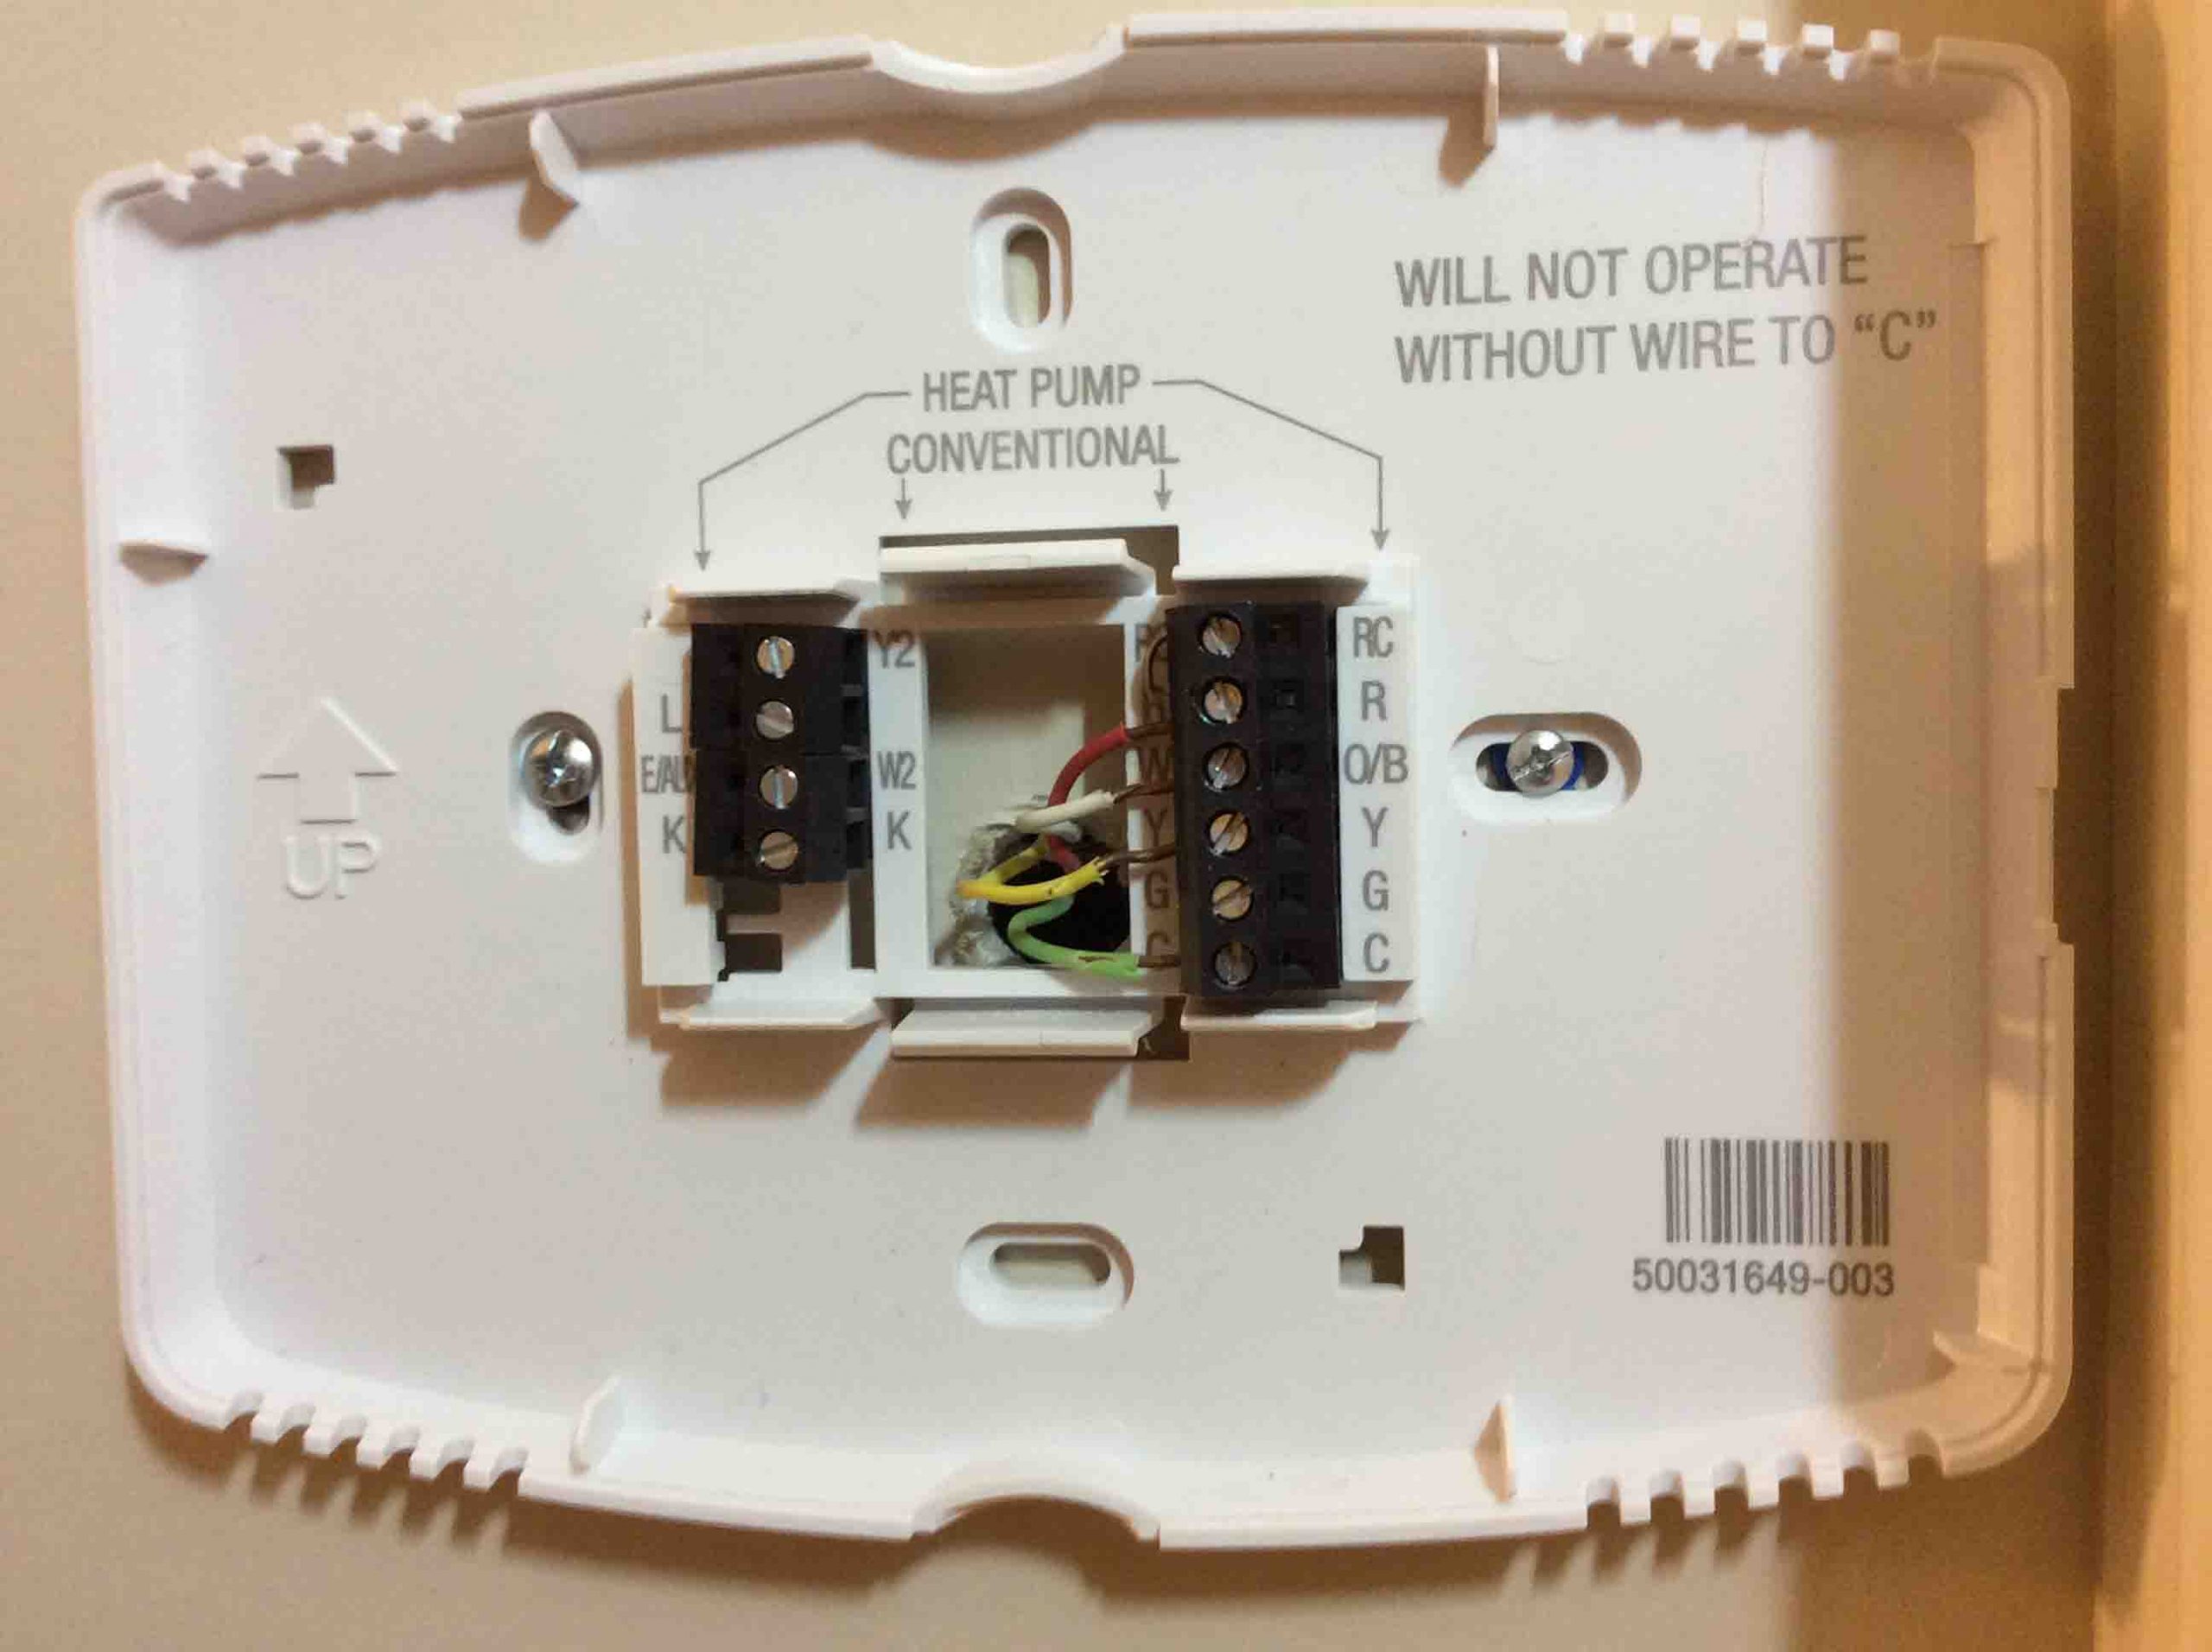 Honeywell Thermostat 4 Wire Wiring Diagram - Tom's Tek Stop  Honeywell Two Stage Thermostat Wiring Diagram    Tom's Tek Stop